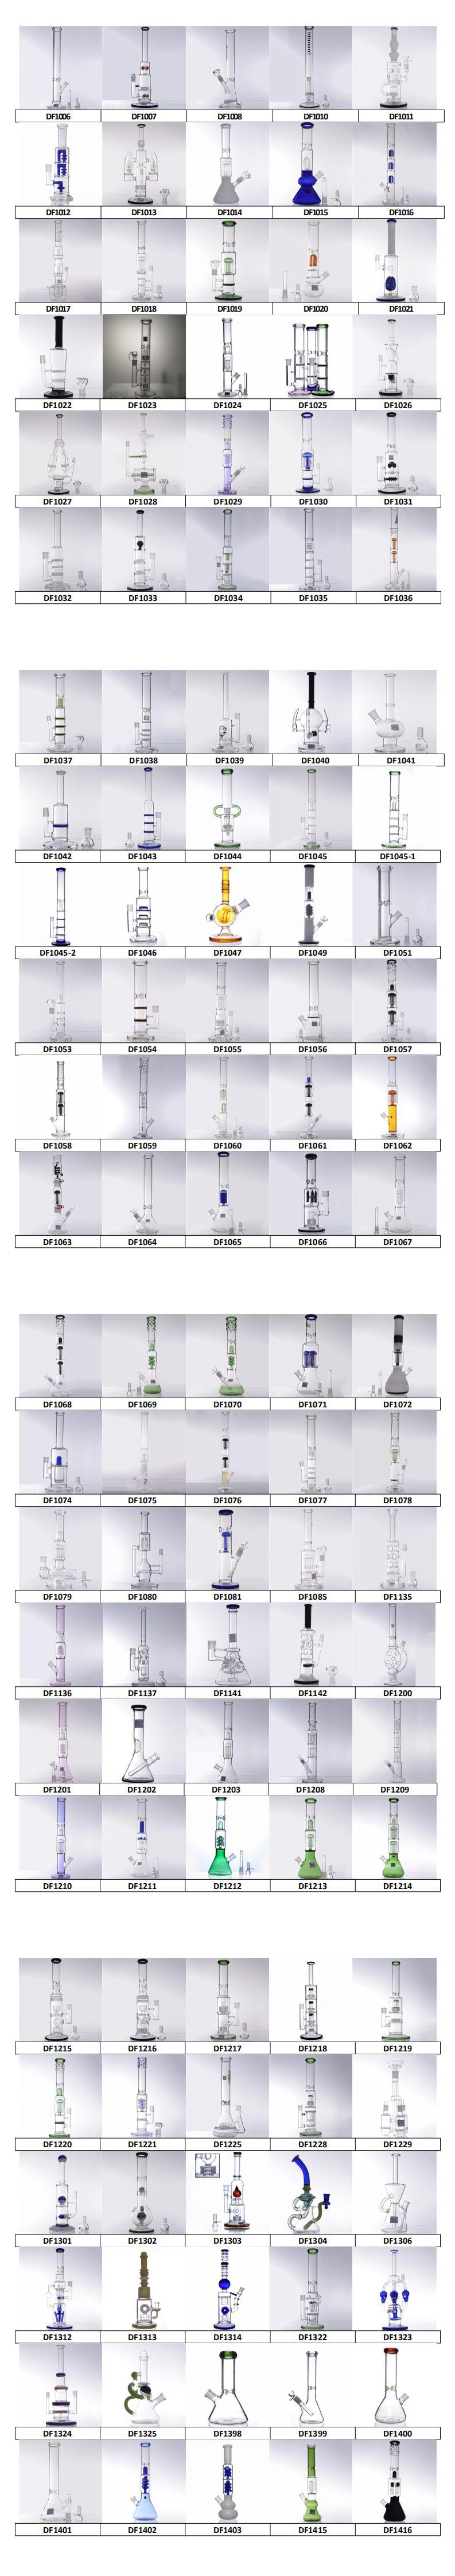 DF8103 Best Factory Price Color Smoke Hookah Glass Smoking Pipes